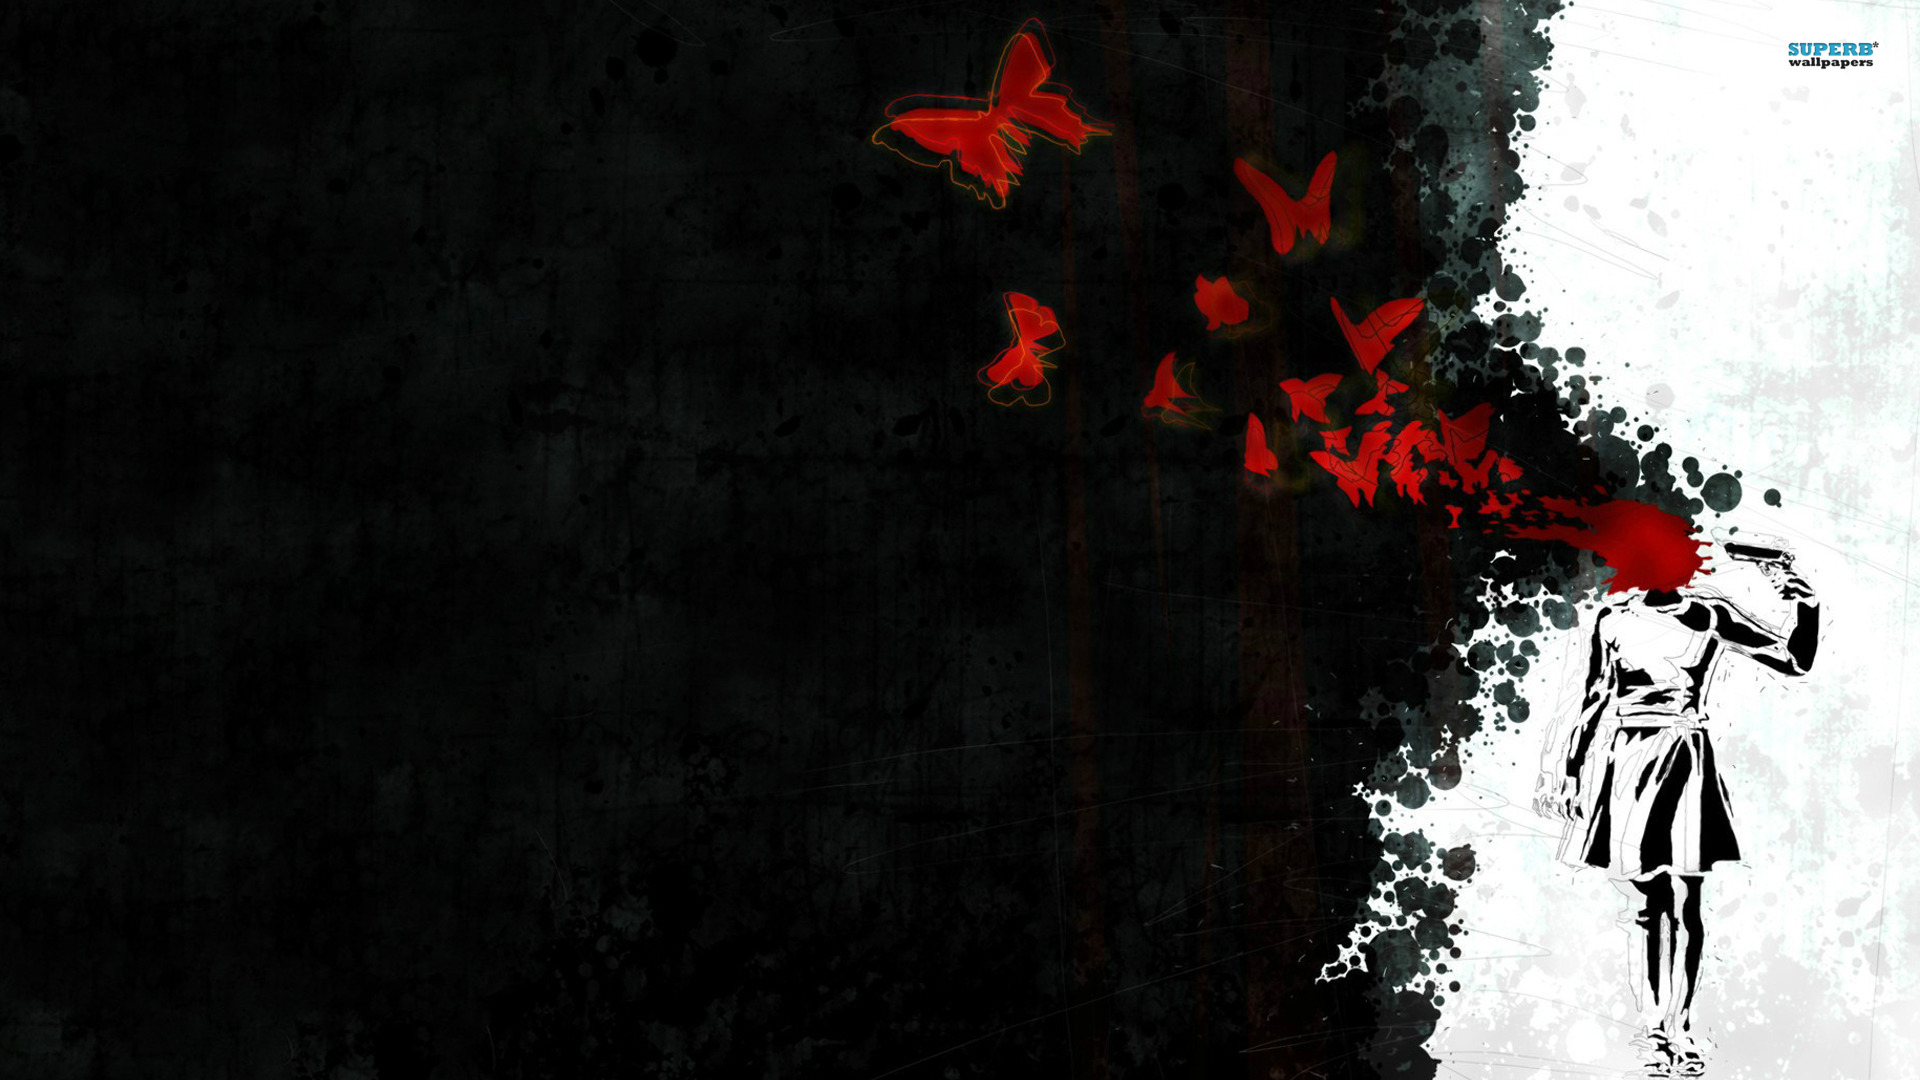 Butterfly suicide wallpaper - Fantasy wallpapers -